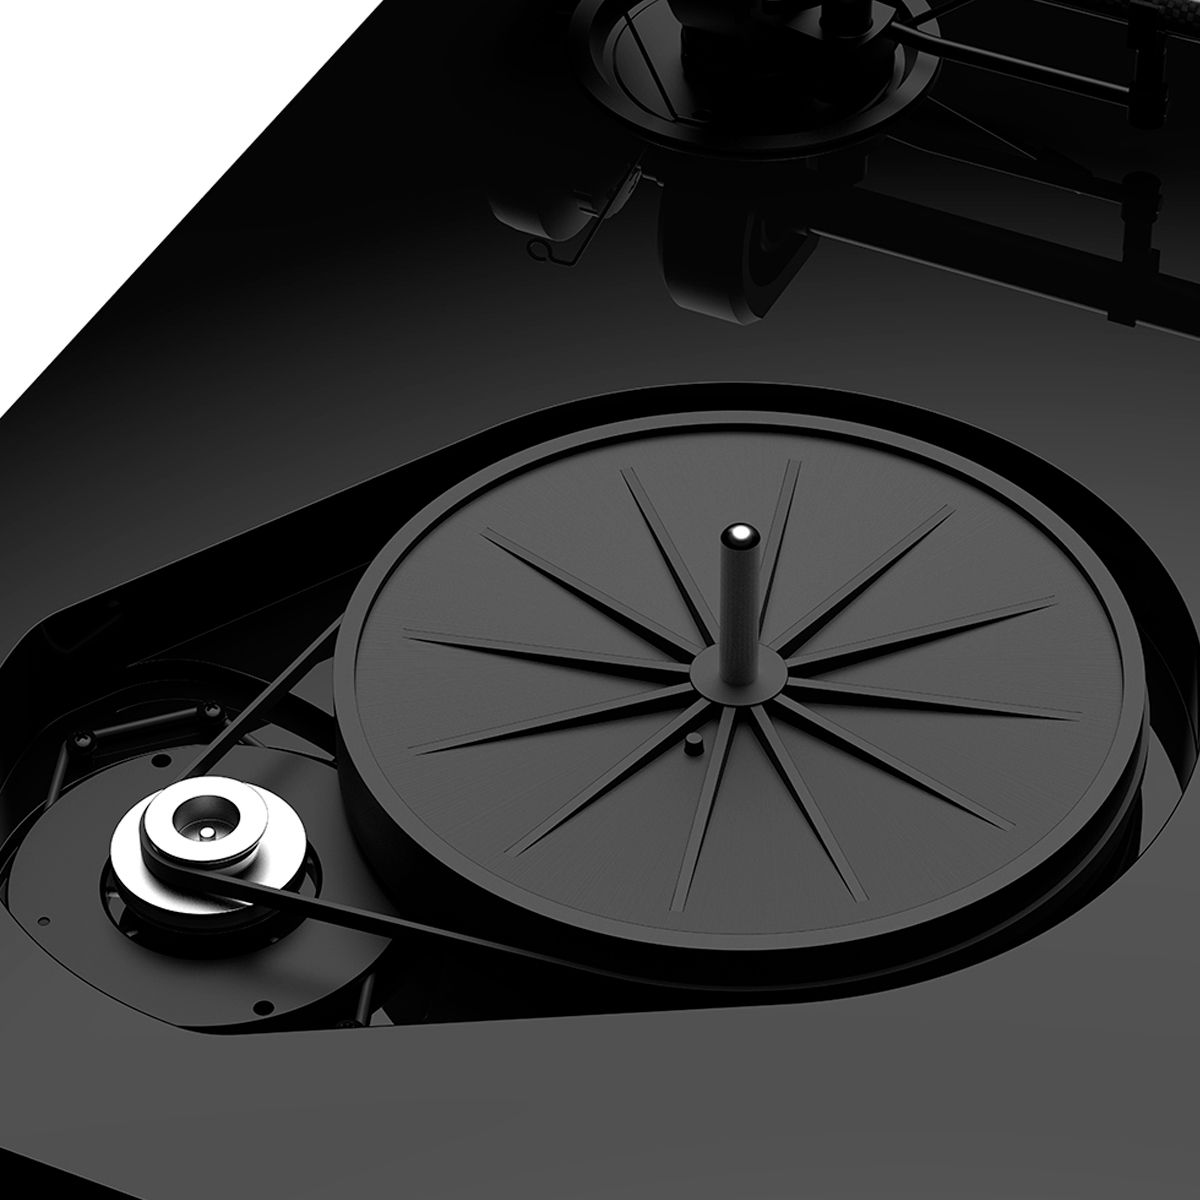 Pro-Ject X1 Turntable Black